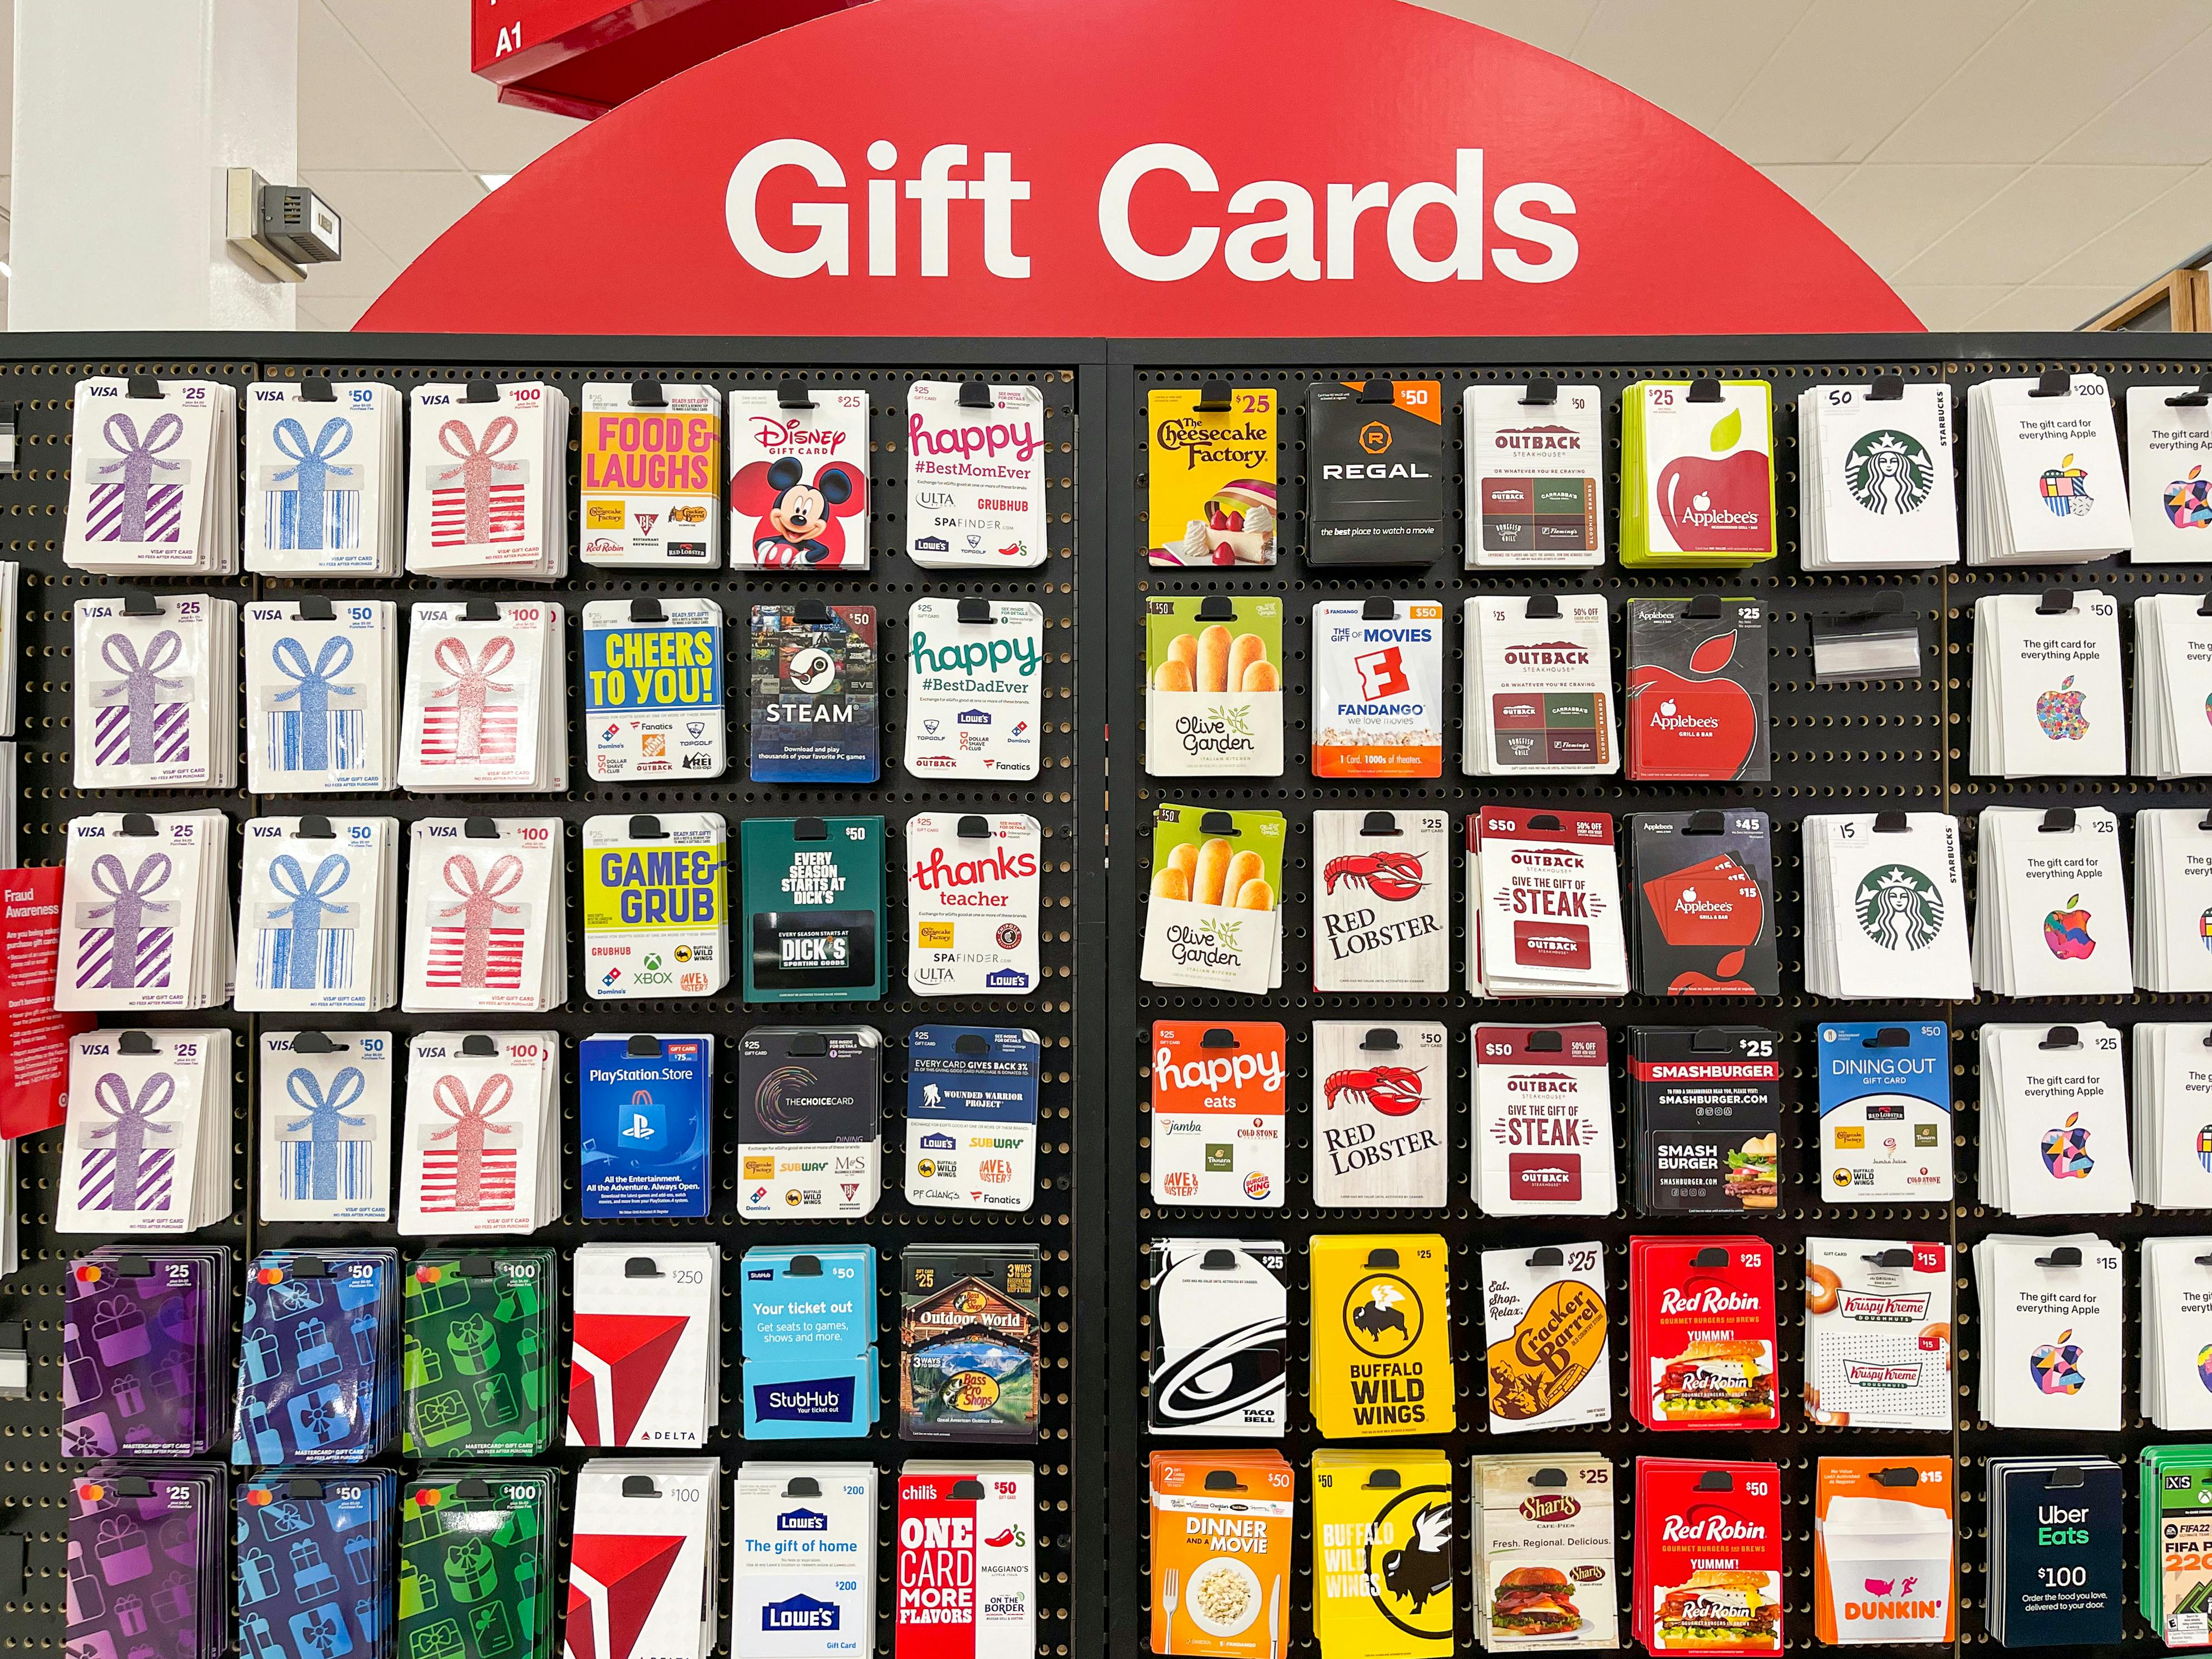 Are Amazon Gift Cards at Walmart? 2